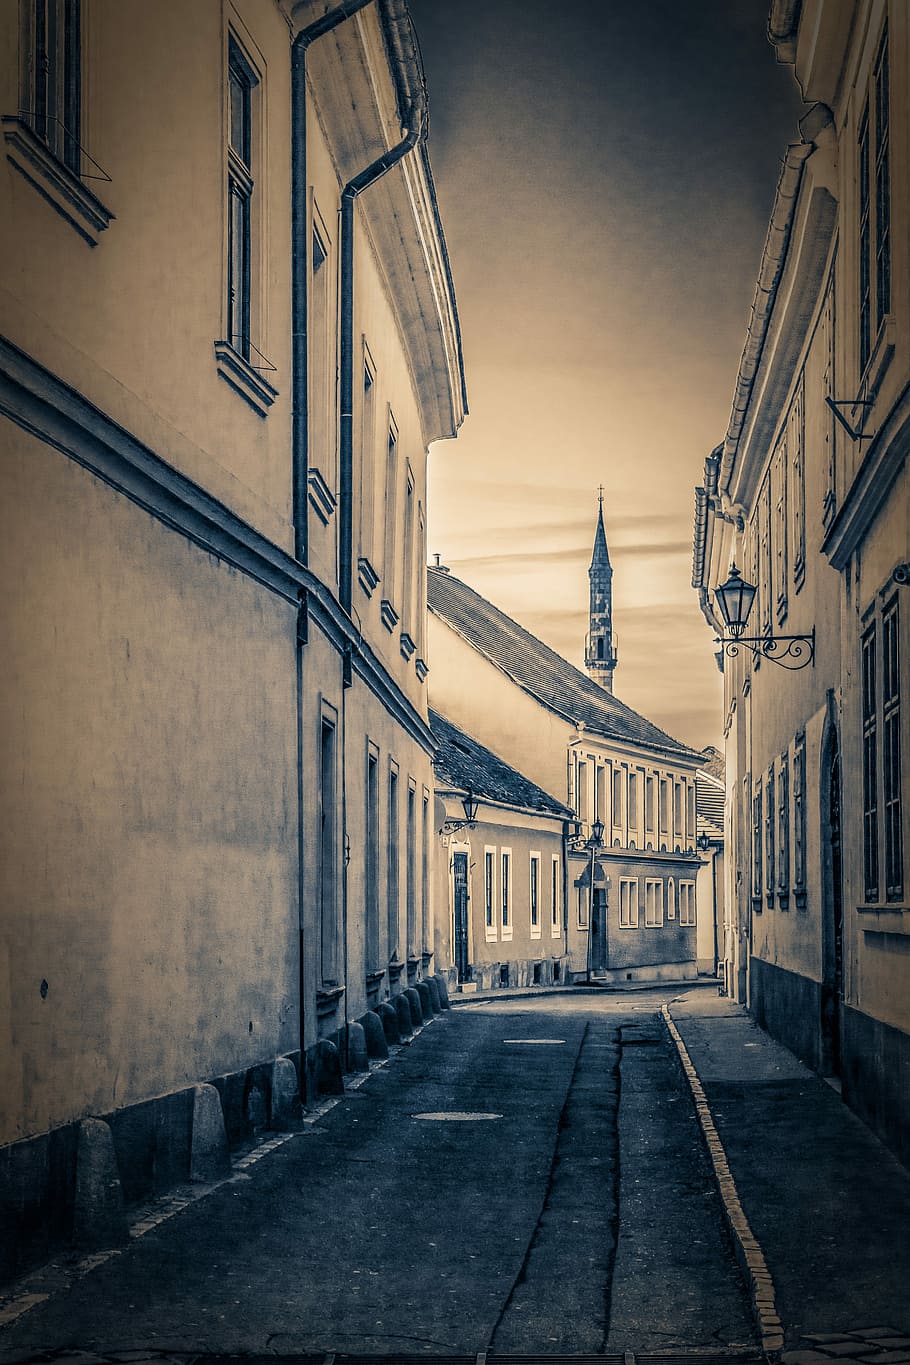 gray scale photo, gray scale, the city of eger, street, old, houses, nostalgia, mall, architecture, city